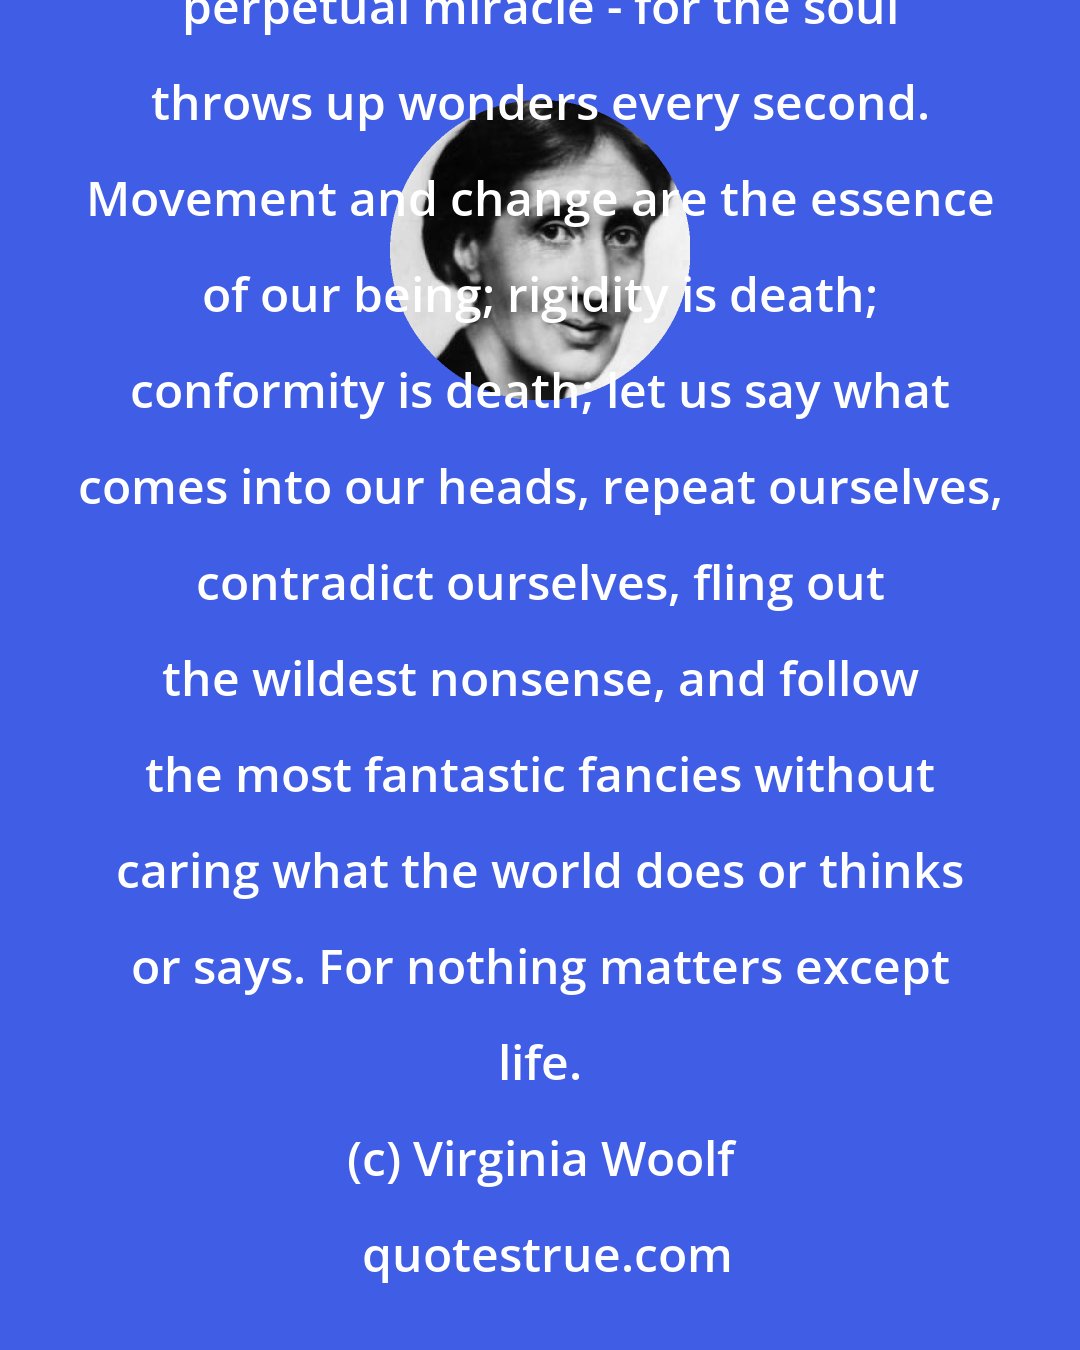 Virginia Woolf: Let us simmer over our incalculable cauldron, our enthralling confusion, our hotchpotch of impulses, our perpetual miracle - for the soul throws up wonders every second. Movement and change are the essence of our being; rigidity is death; conformity is death; let us say what comes into our heads, repeat ourselves, contradict ourselves, fling out the wildest nonsense, and follow the most fantastic fancies without caring what the world does or thinks or says. For nothing matters except life.